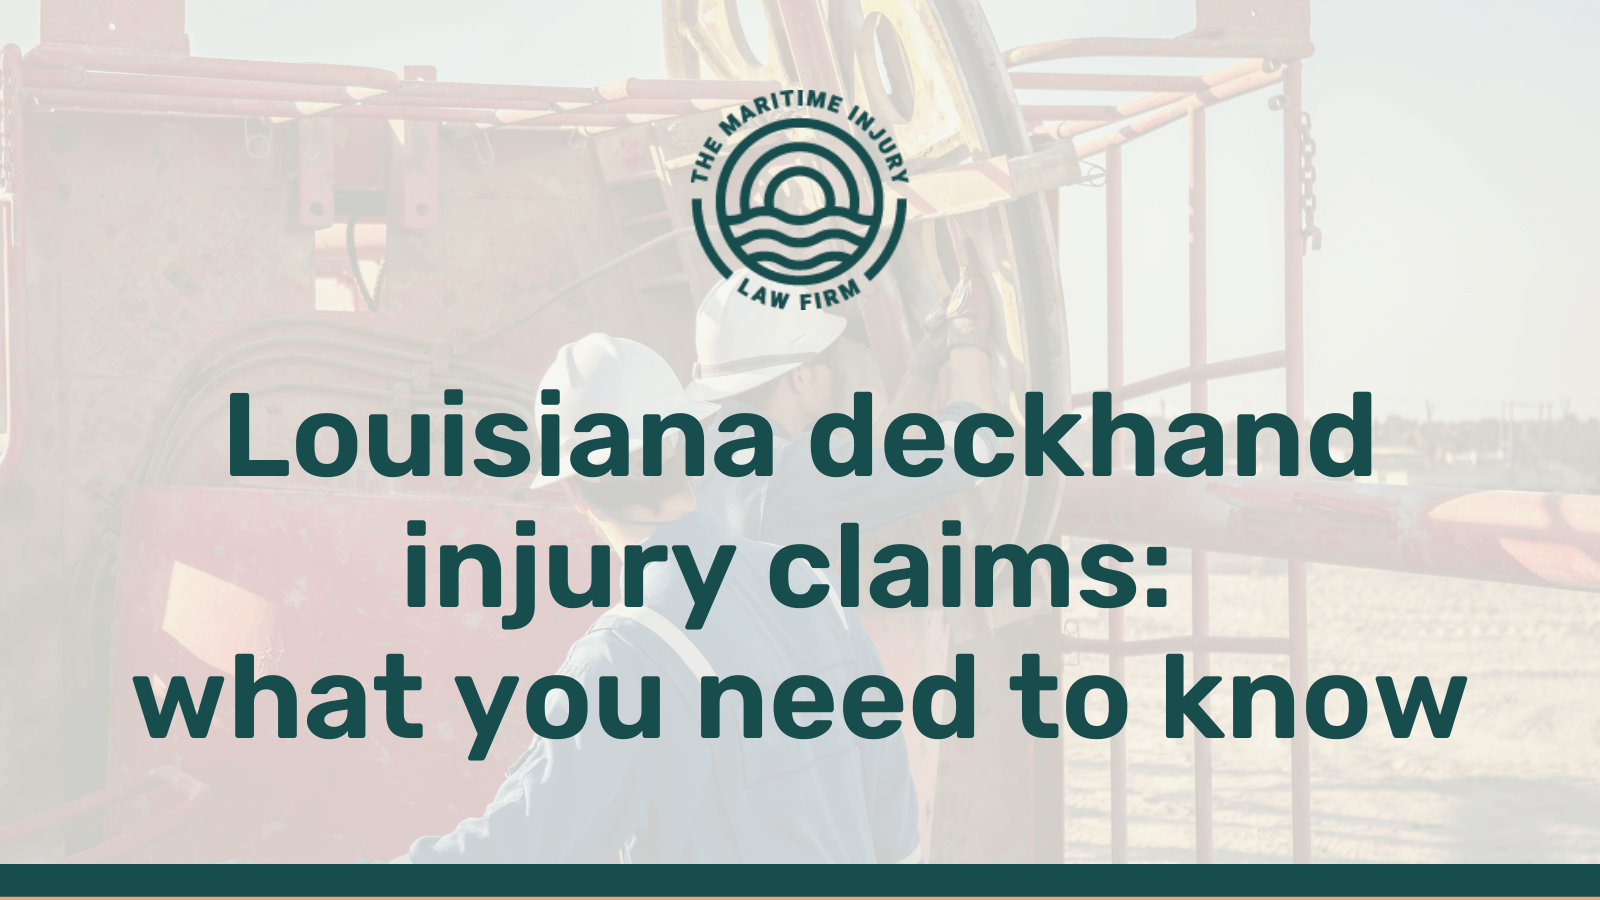 Louisiana deckhand injury claims: what you need to know - maritime injury law firm - George Vourvoulias